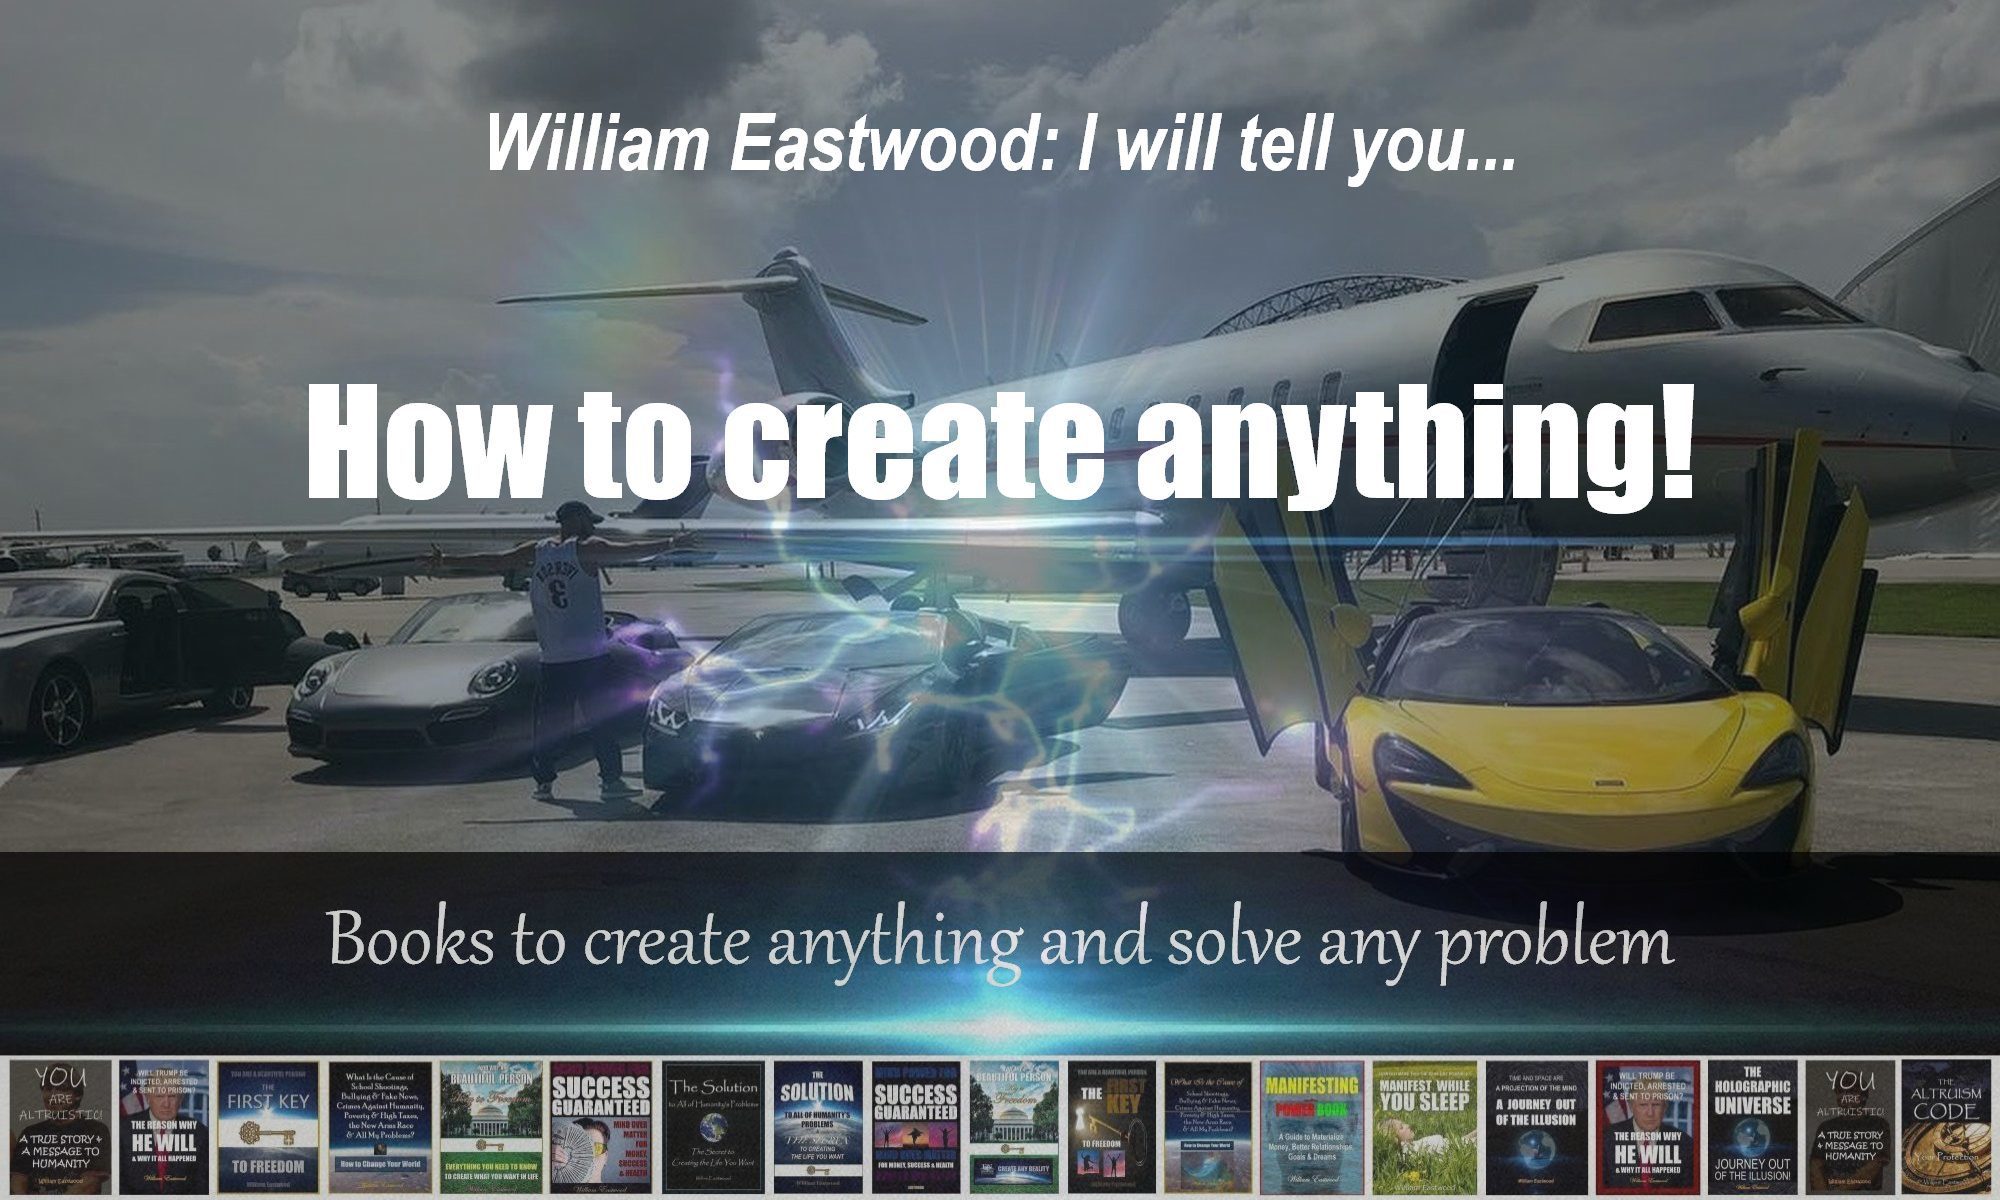 What are the best manifesting books to manifest money and success in 2023? Eastwood